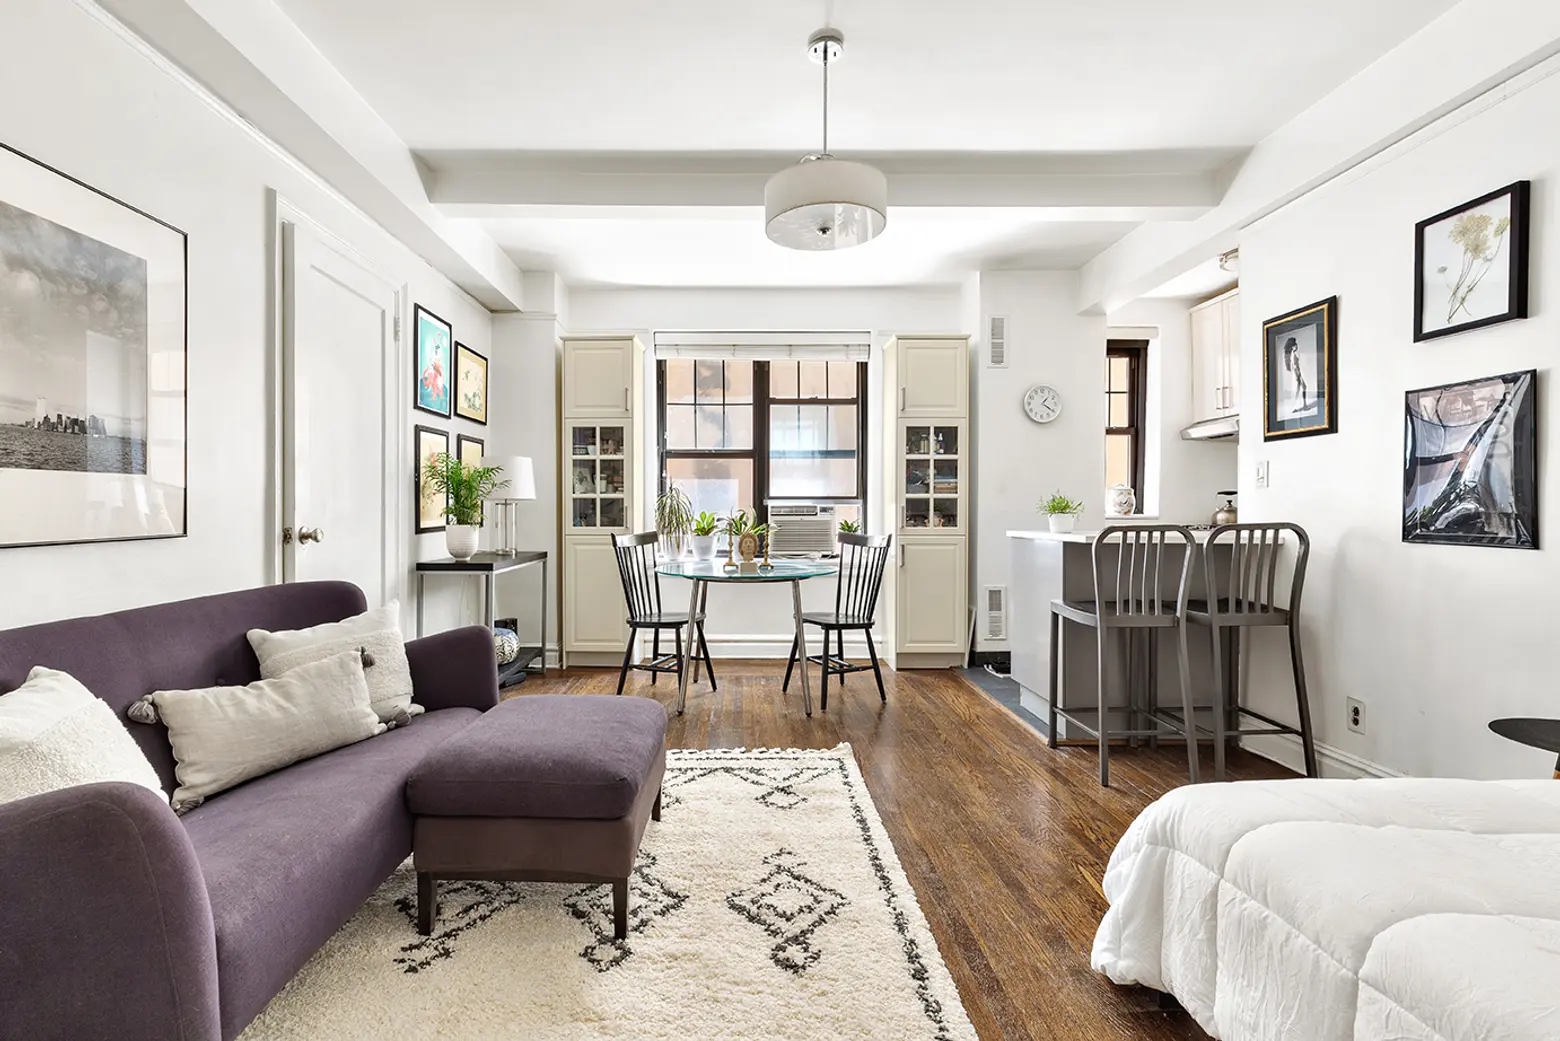 For $435K, a newly renovated Gramercy studio full of pre-war details